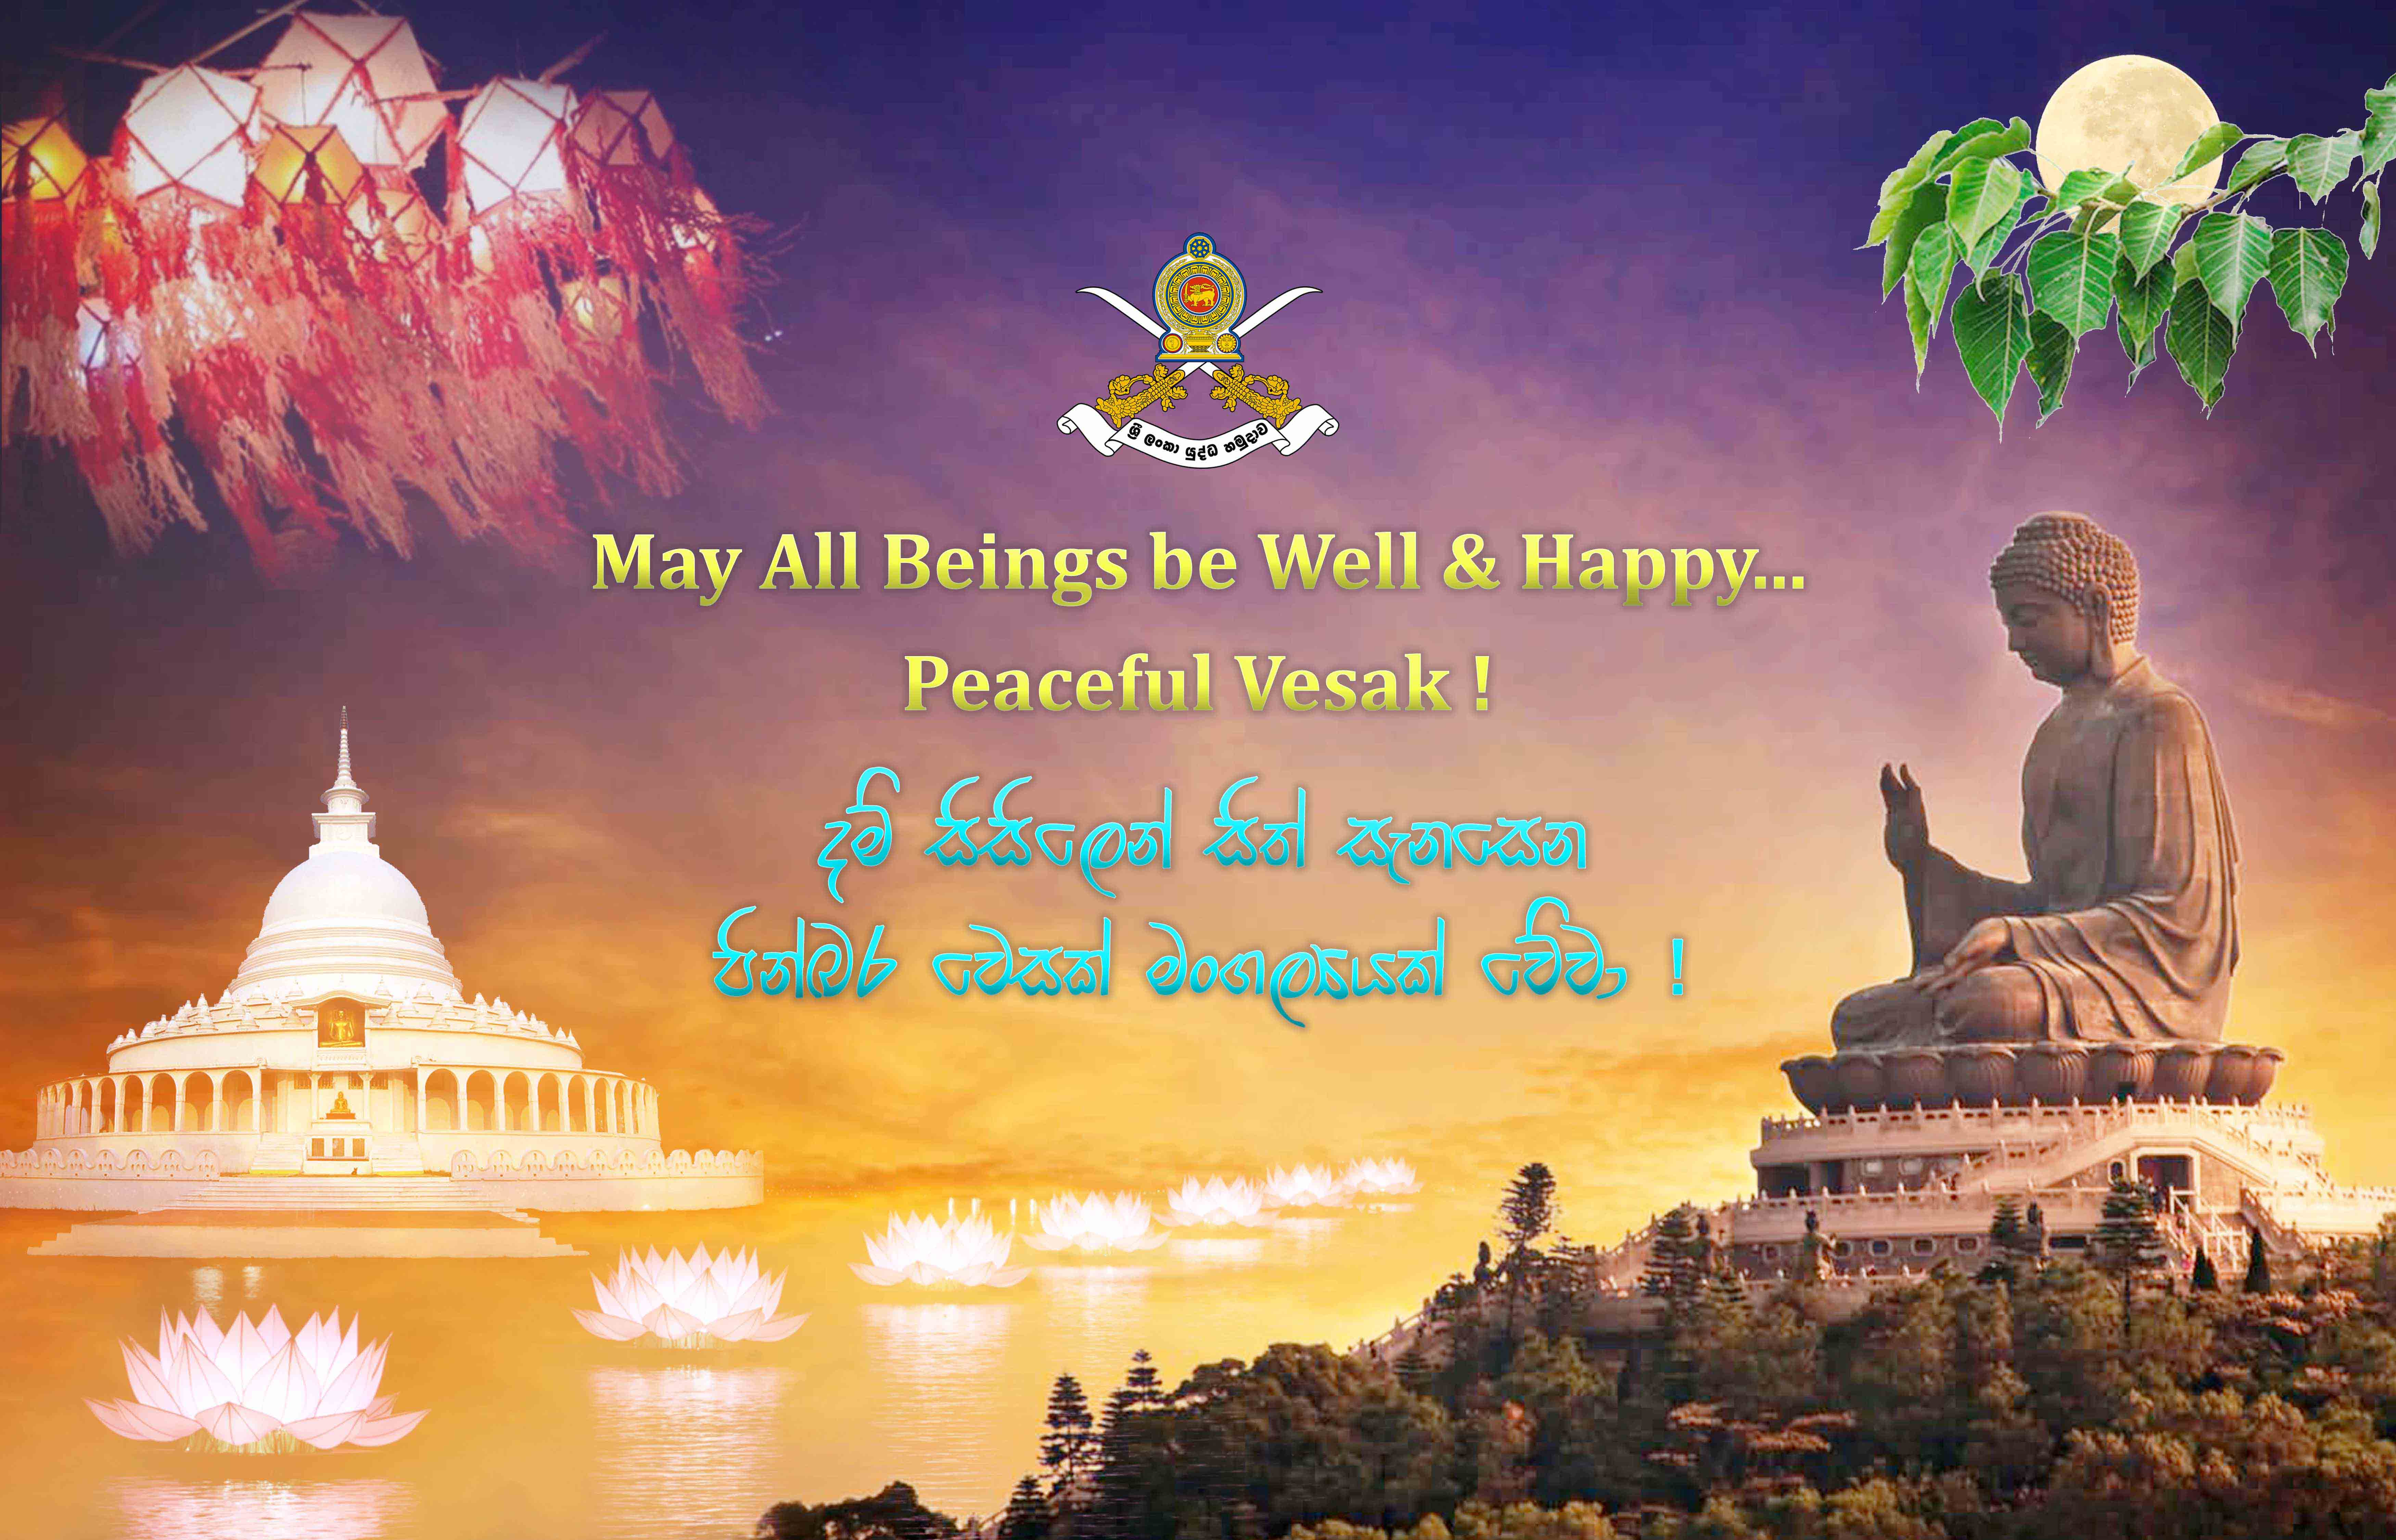 May All of You Be Well & Happy During Vesak !